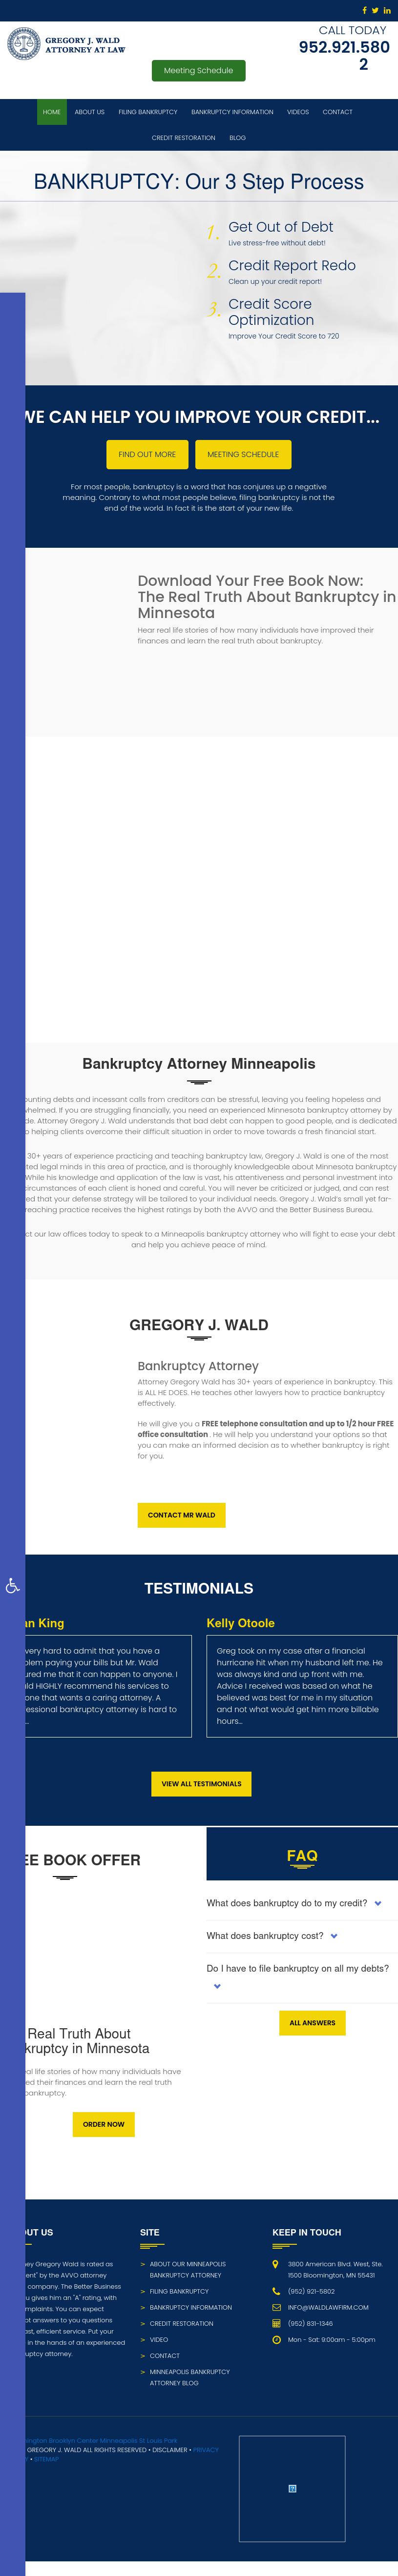 Gregory J. Wald, Attorney at Law - Minneapolis MN Lawyers